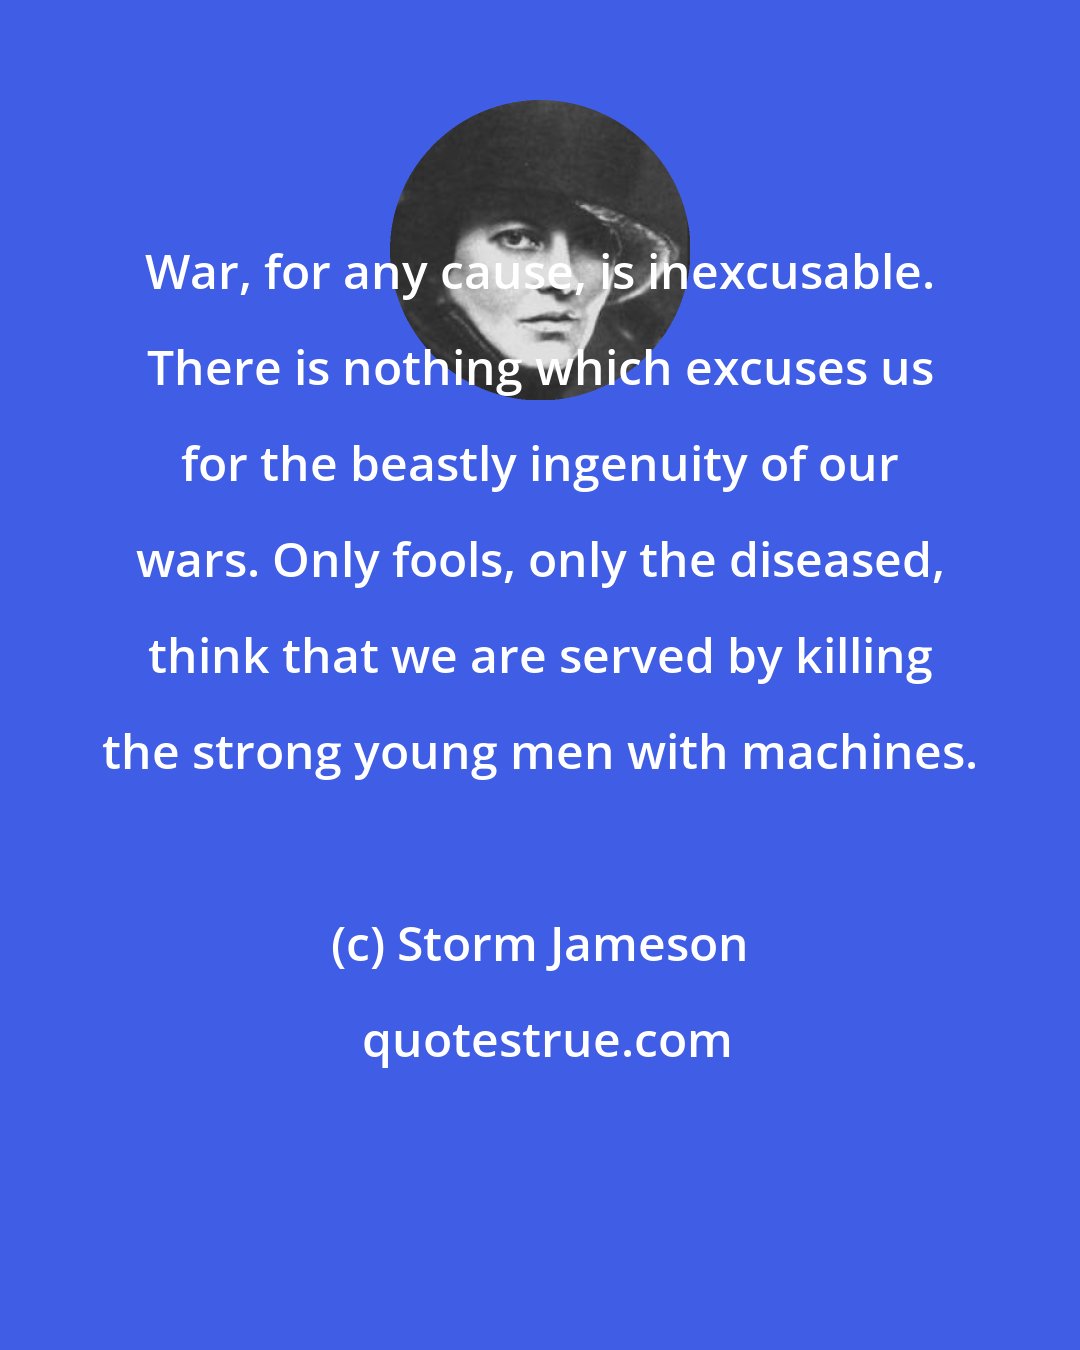 Storm Jameson: War, for any cause, is inexcusable. There is nothing which excuses us for the beastly ingenuity of our wars. Only fools, only the diseased, think that we are served by killing the strong young men with machines.